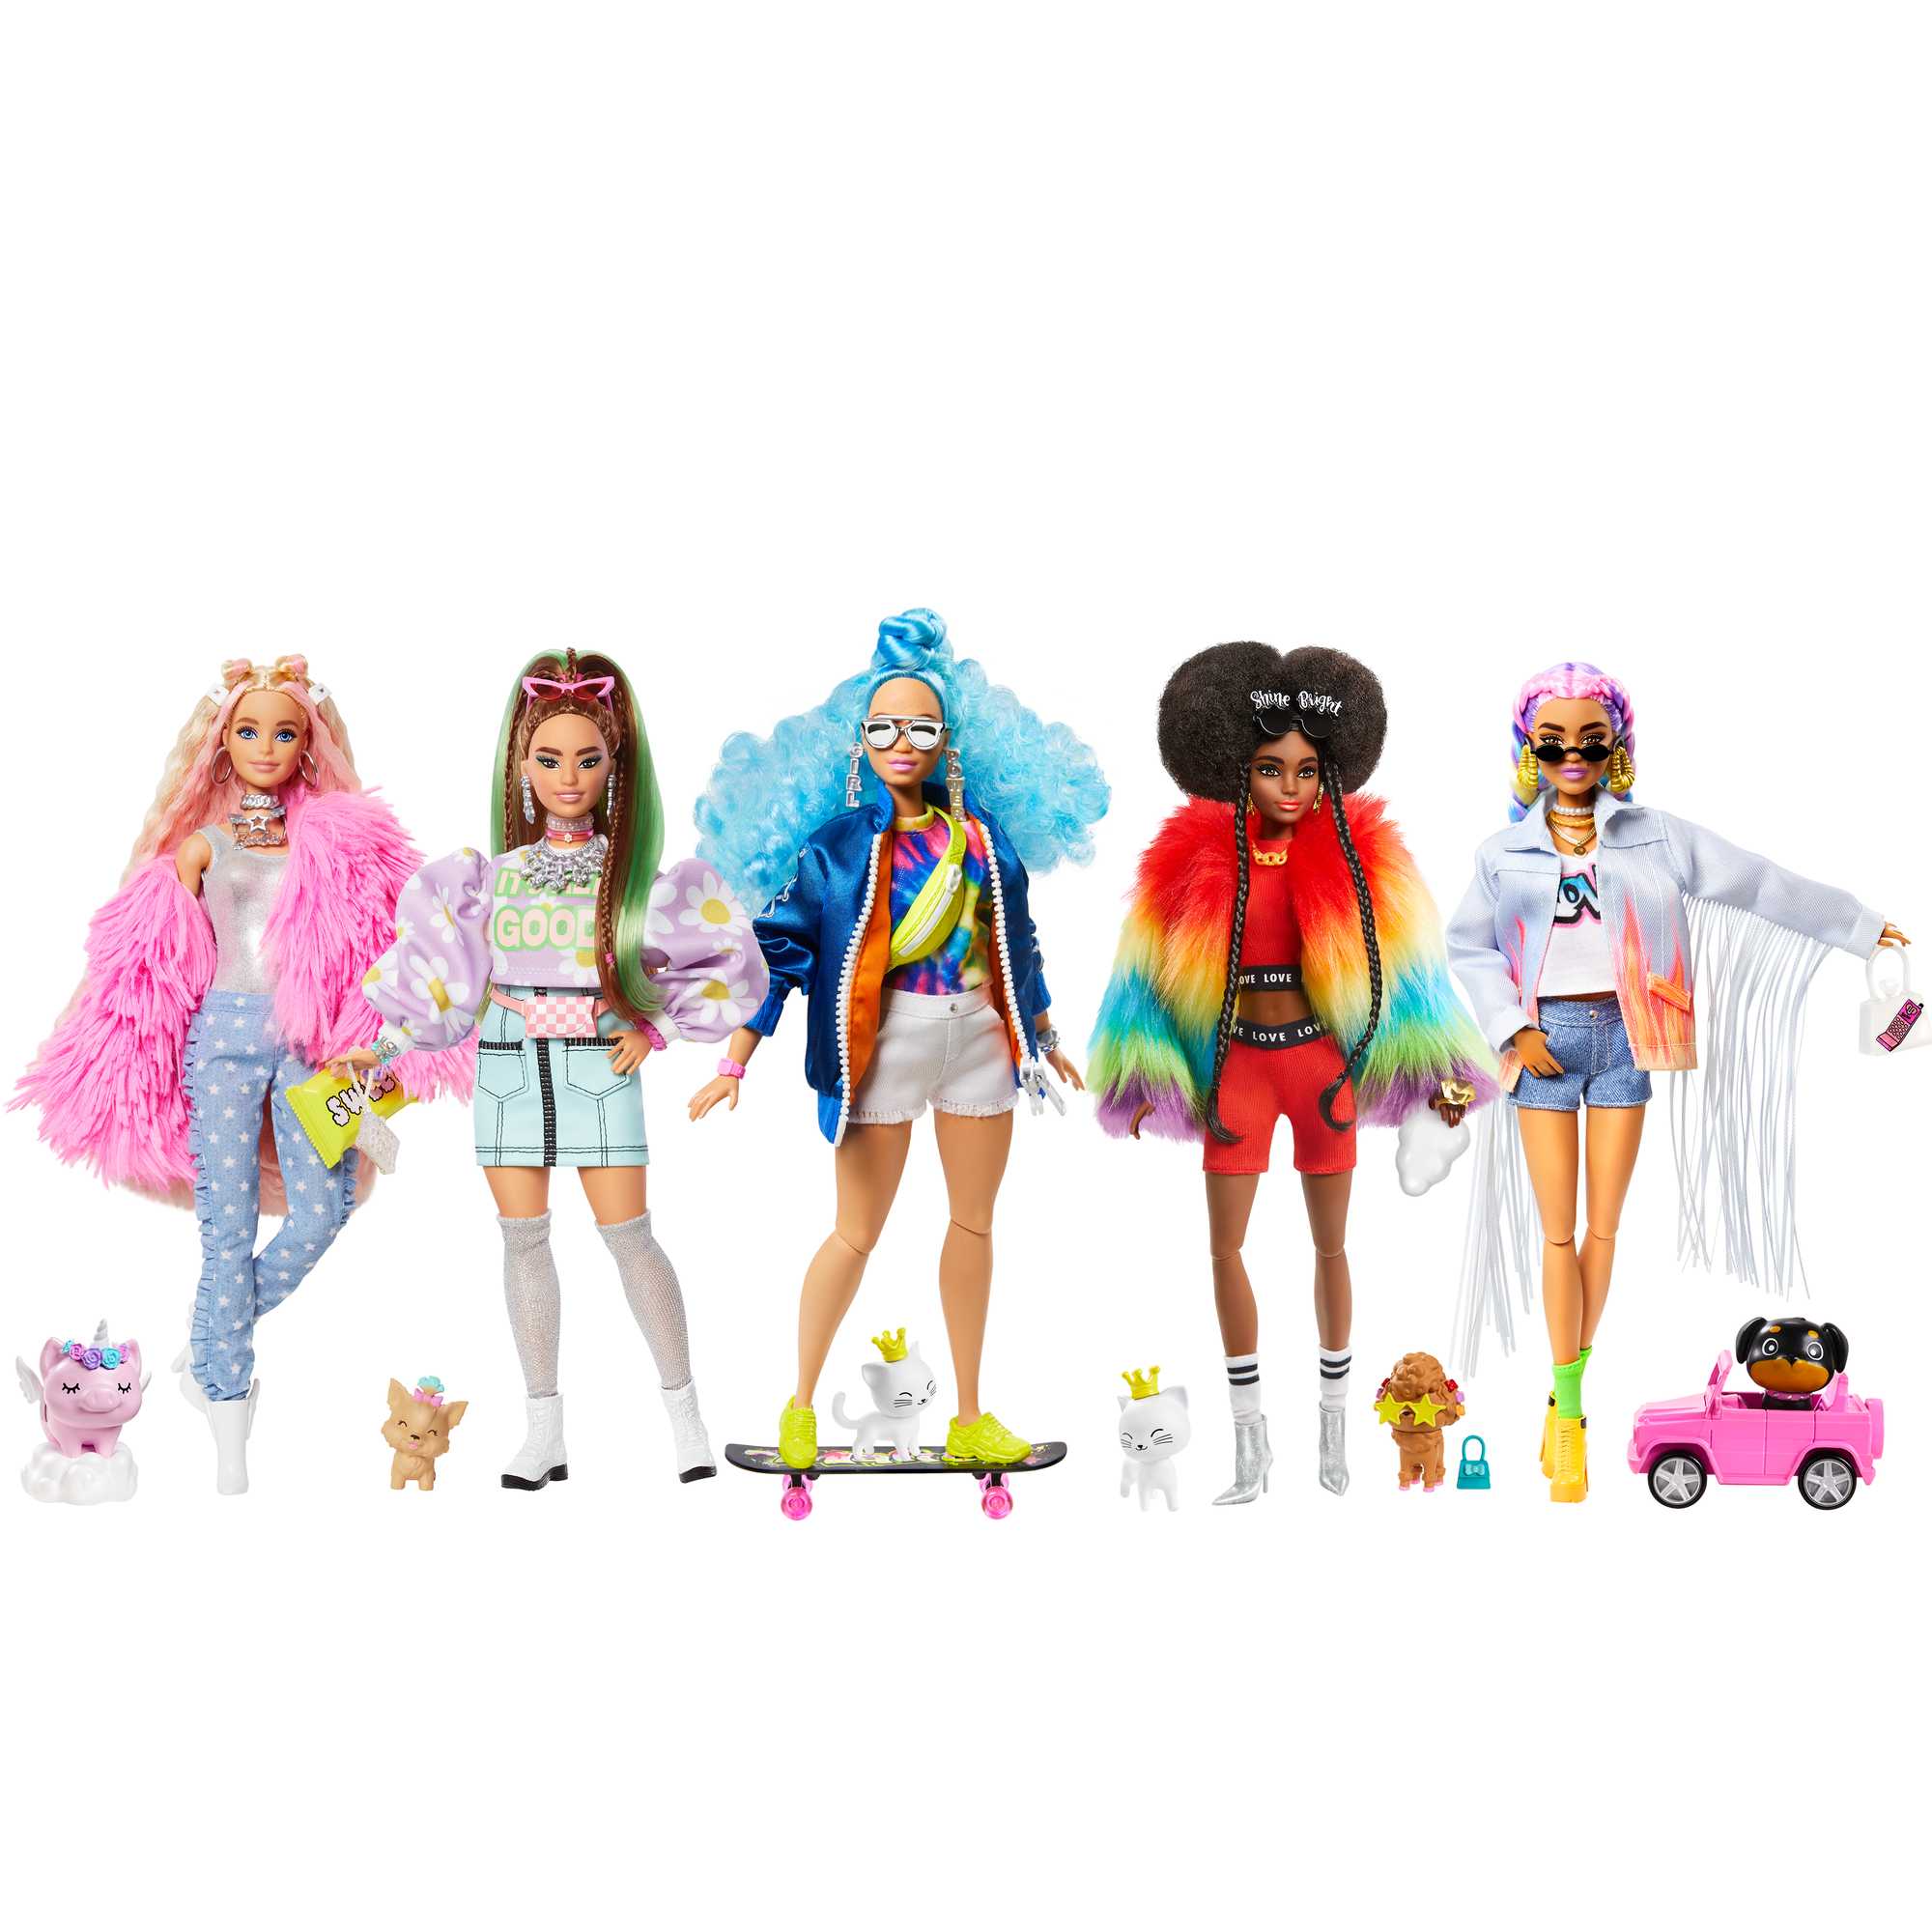 Barbie Extra Fashion Doll 5-Pack with 6 Pets & 70 Styling Pieces, Clothes & Accessories - image 2 of 22